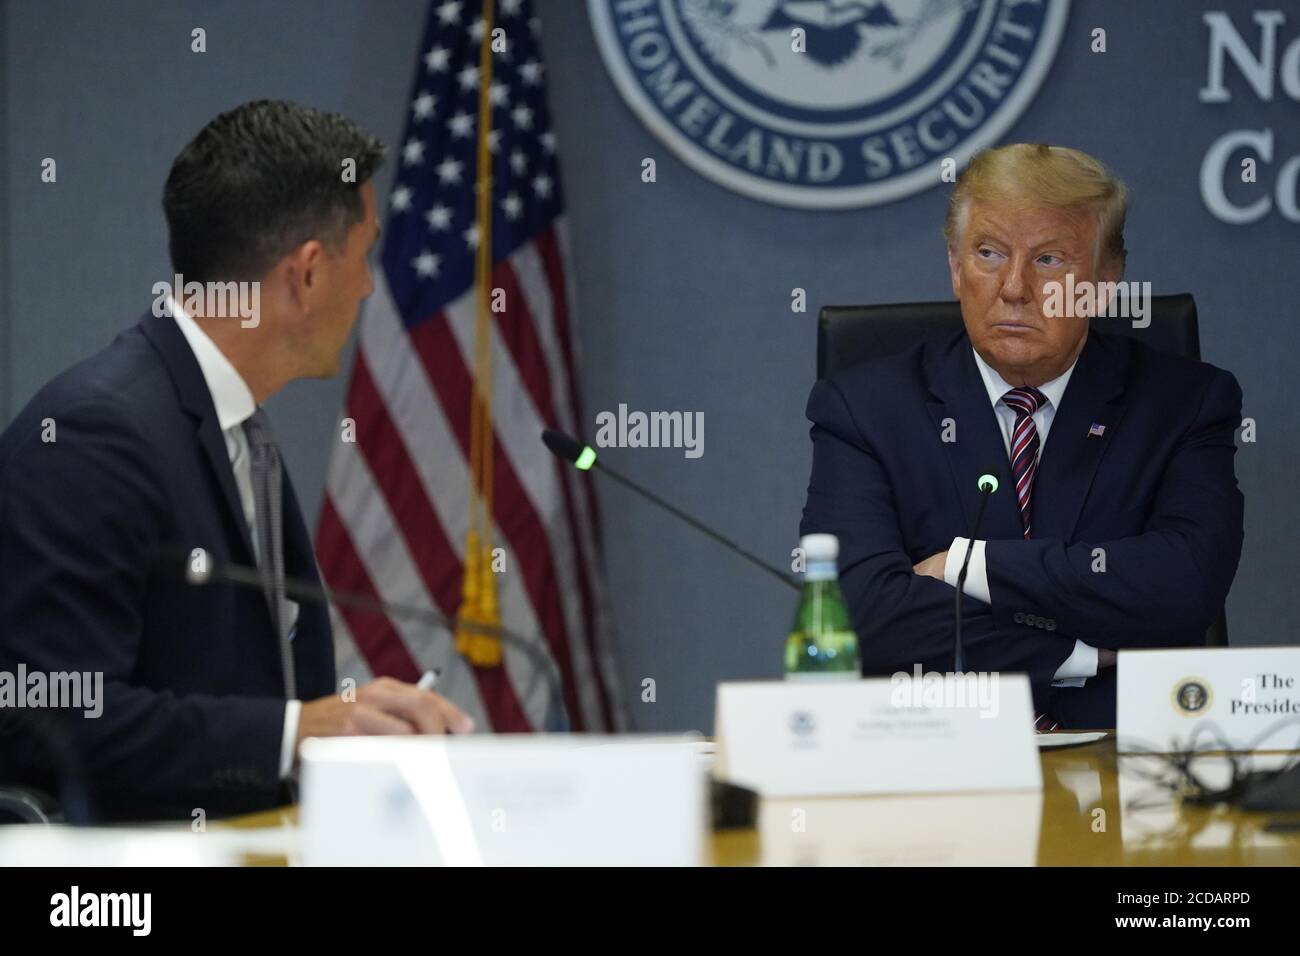 Washington, United States Of America. 27th Aug, 2020. United States President Donald J. Trump listens to acting US Secretary of Homeland Security Chad F. Wolf as he and US Vice President Mike Pence visit the Federal Emergency Management Agency (FEMA) headquarters for a briefing on Hurricane Laura.Credit: Erin Scott/Pool via CNP *** Local Caption *** BSMID5075486 | usage worldwide Credit: dpa/Alamy Live News Stock Photo